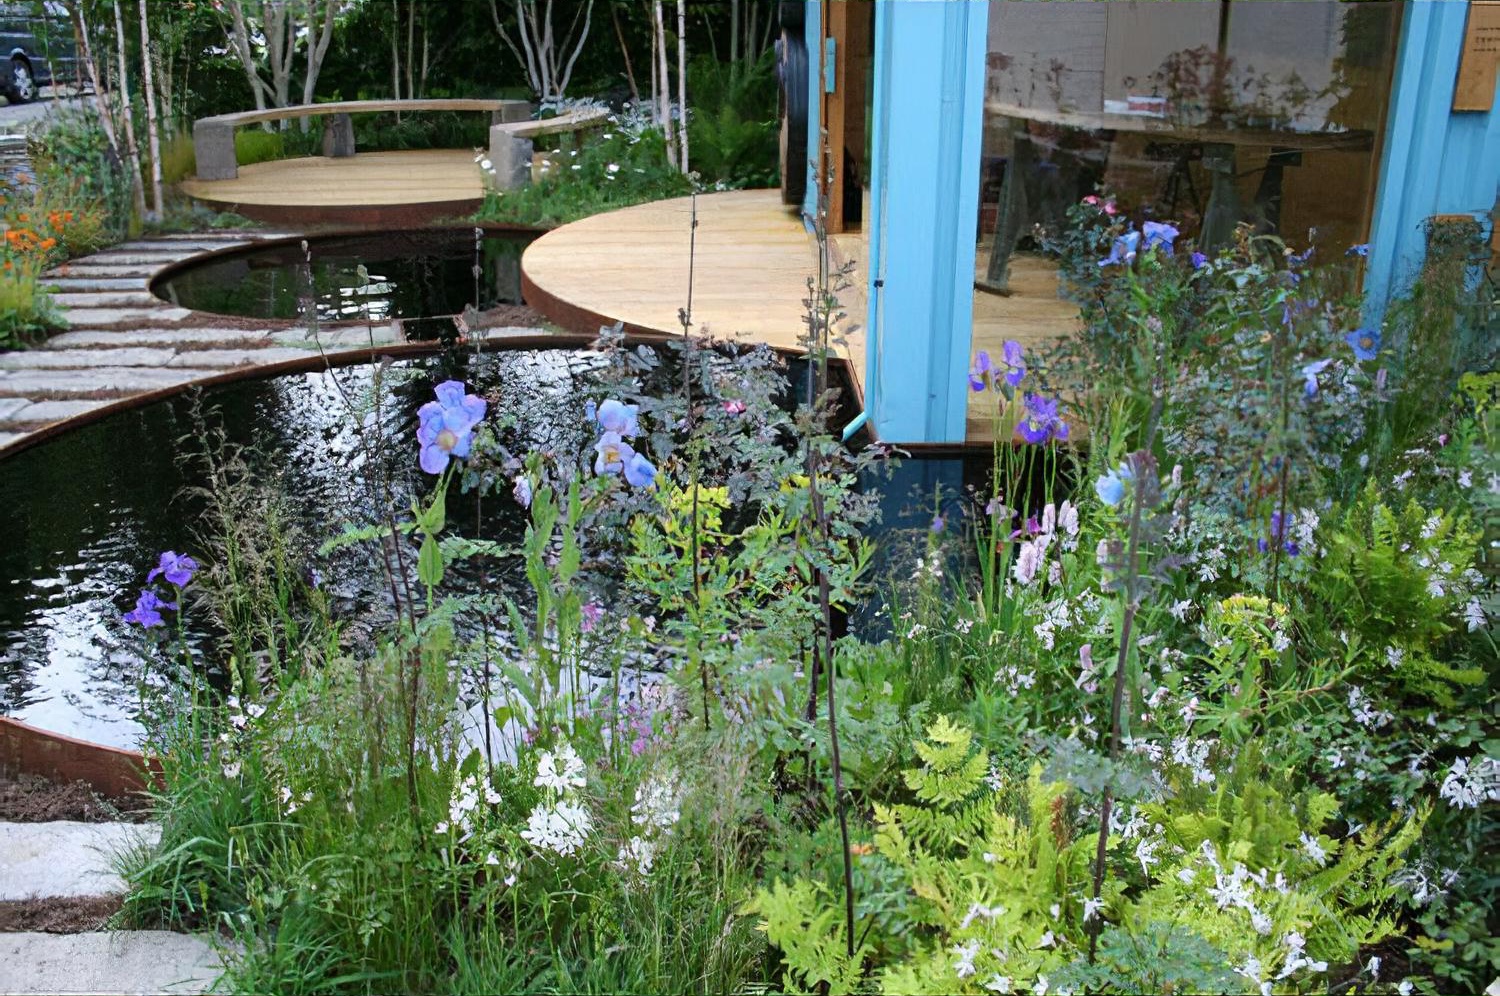 The Royal Bank of Canada - The RBC New Wild Garden Chelsea Flower Show 2011